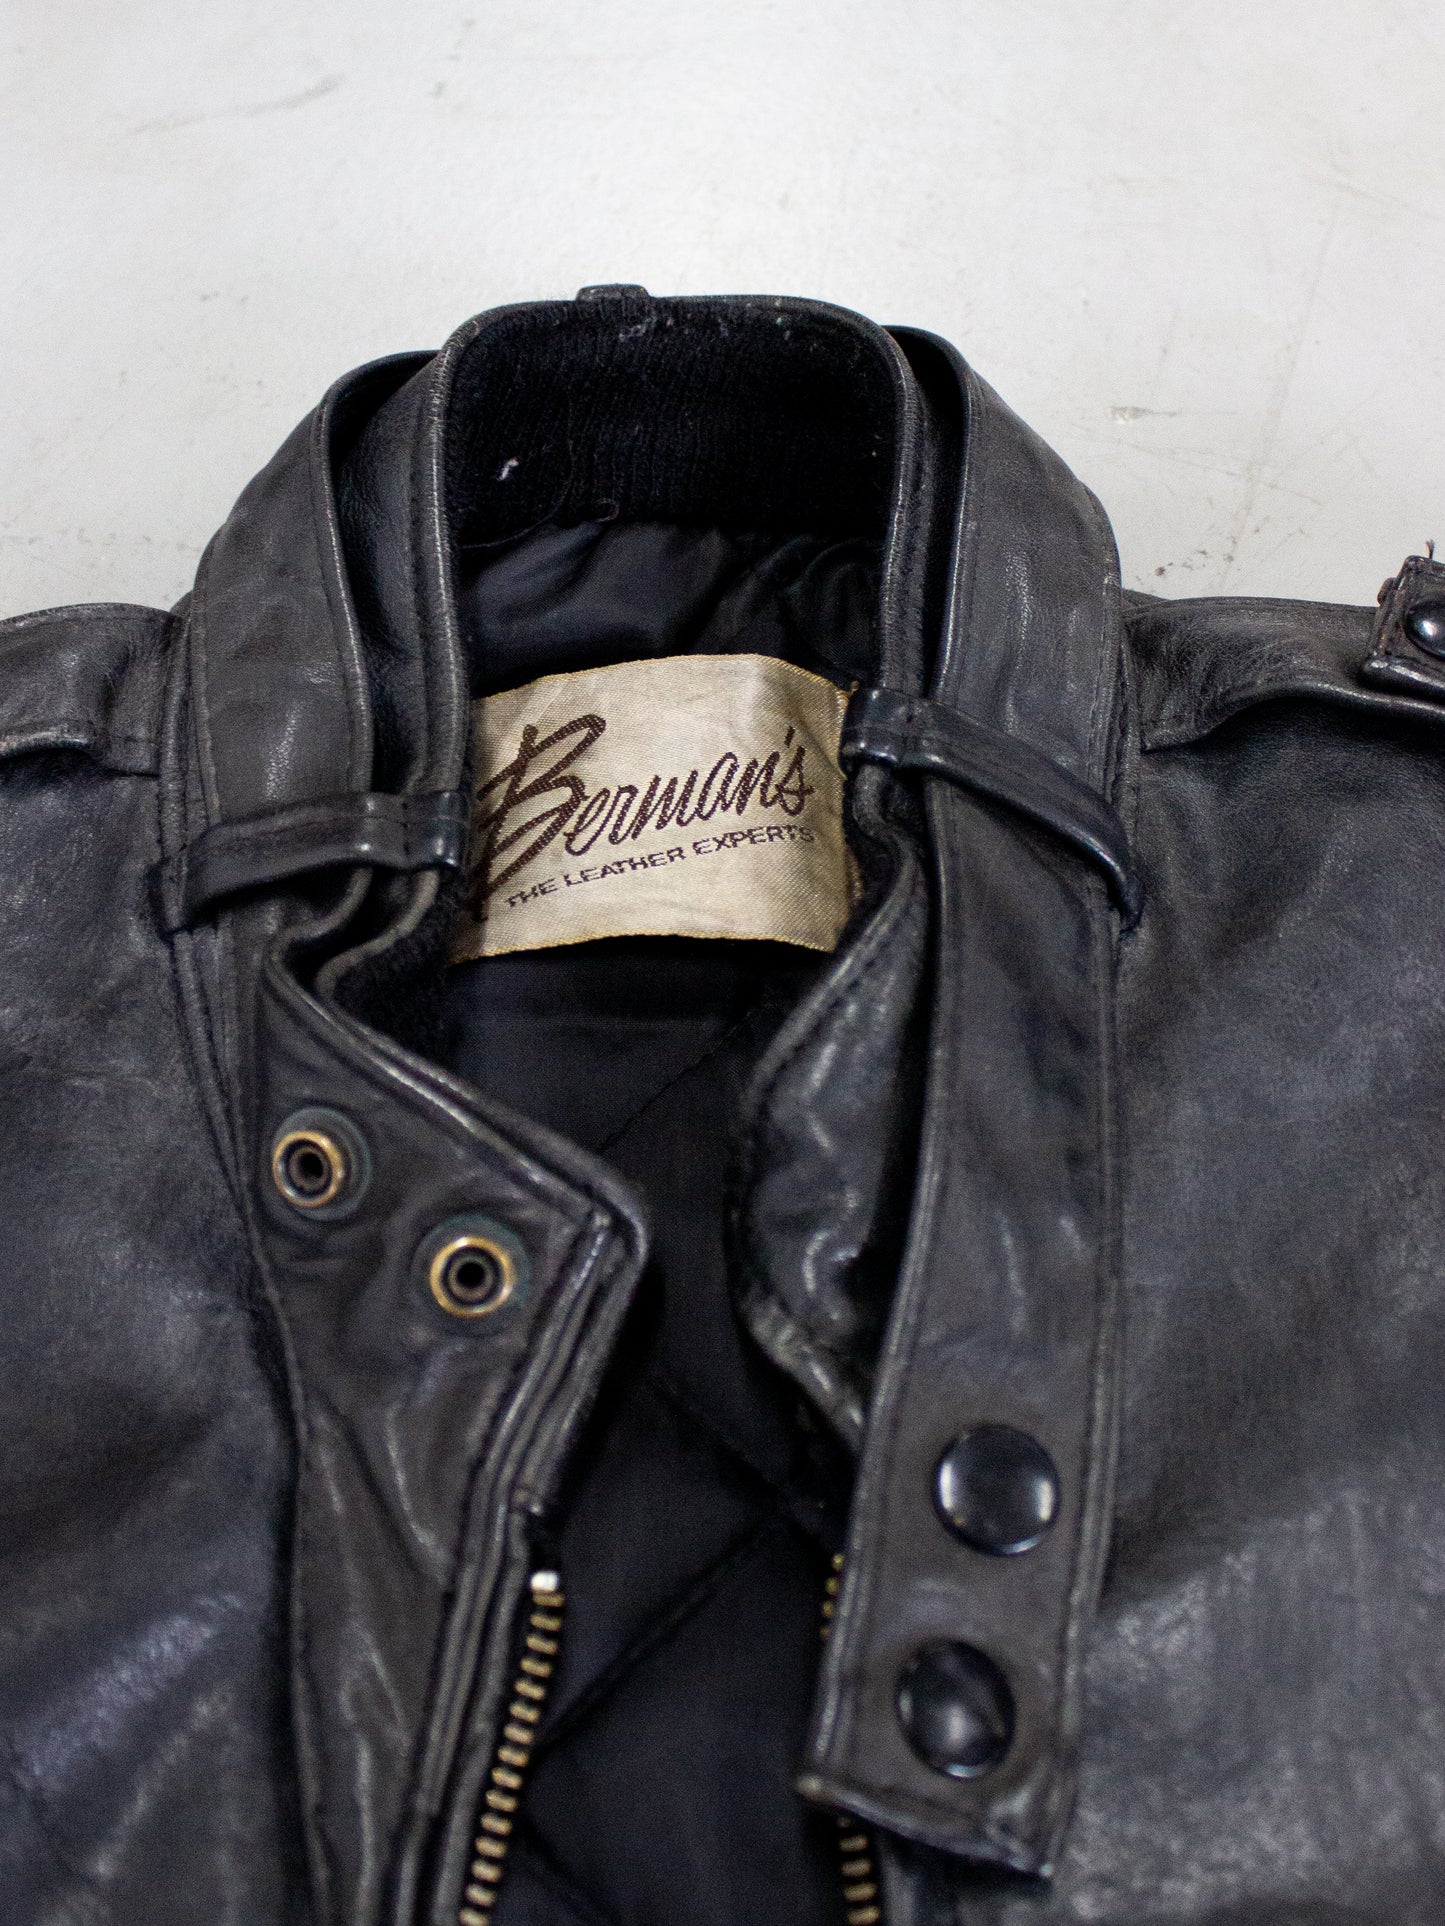 1980's Berman's Leather Cafe Racer Motorcycle Jacket (Small-Medium)